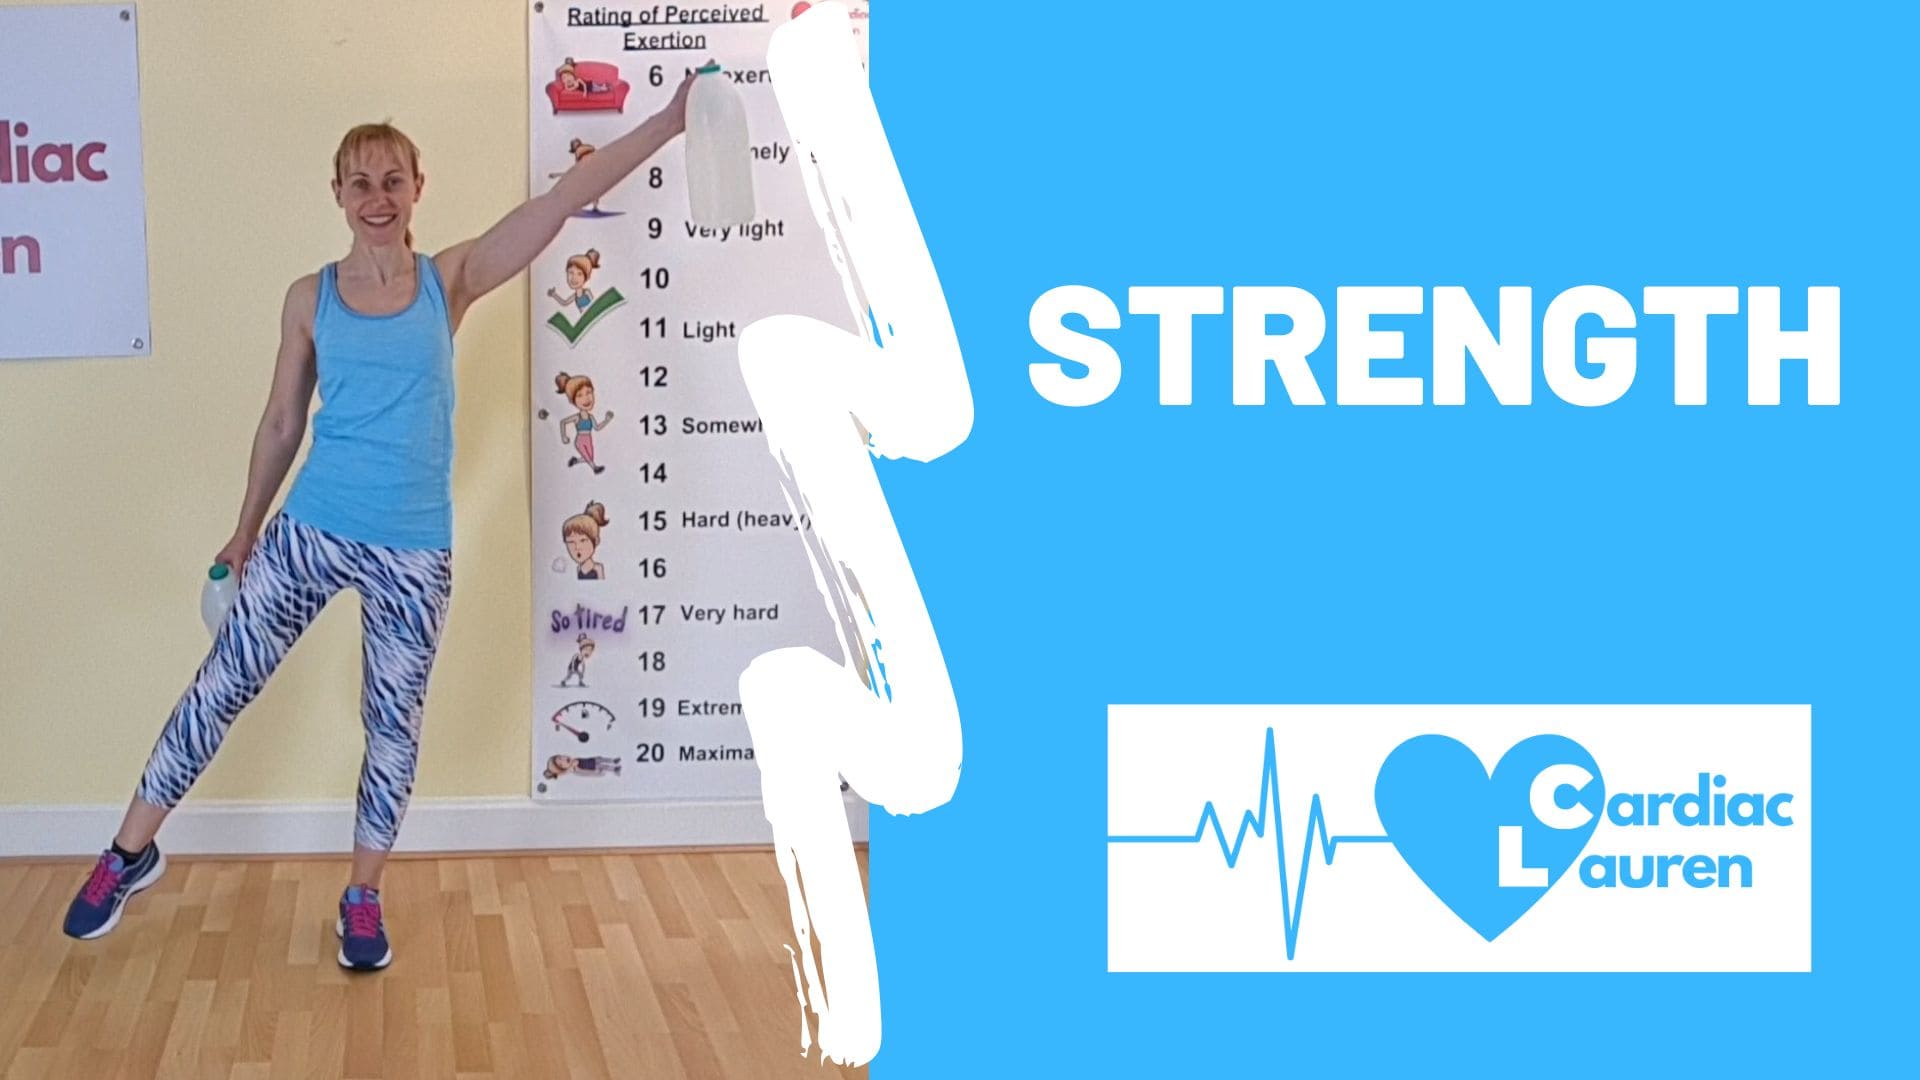 Strength - joint movement & rotation